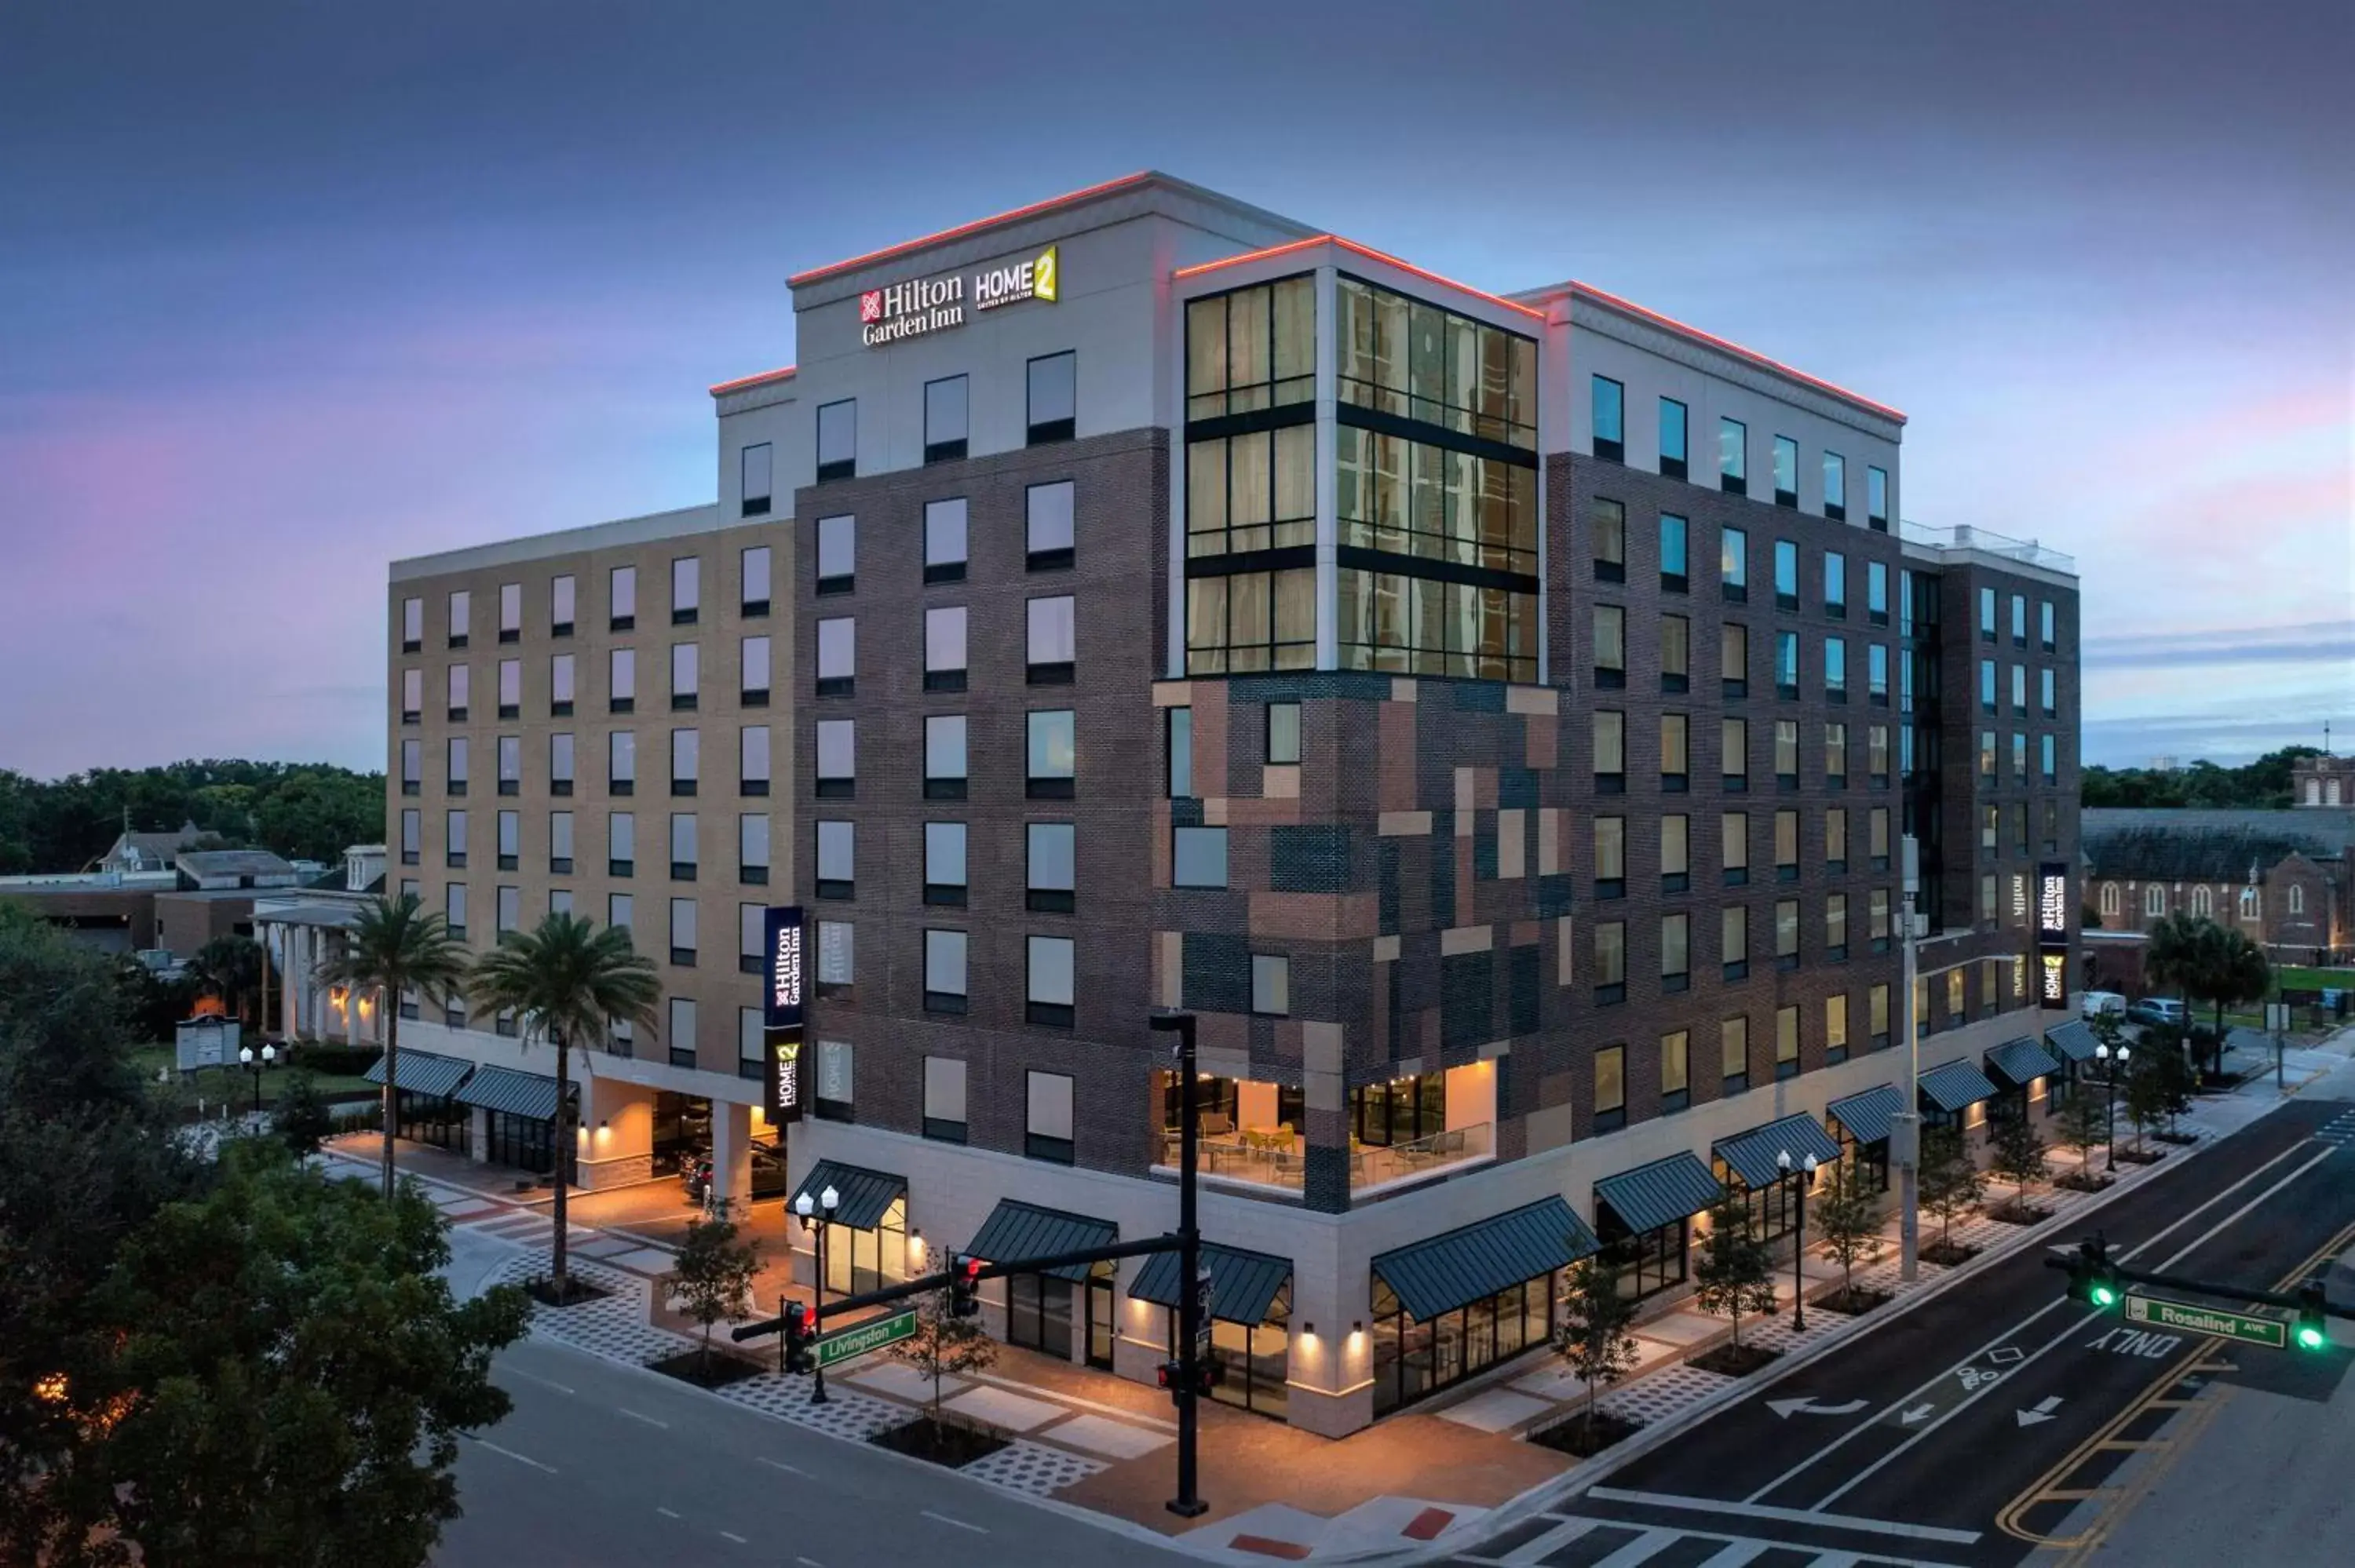 Property Building in Home2 Suites by Hilton Orlando Downtown, FL